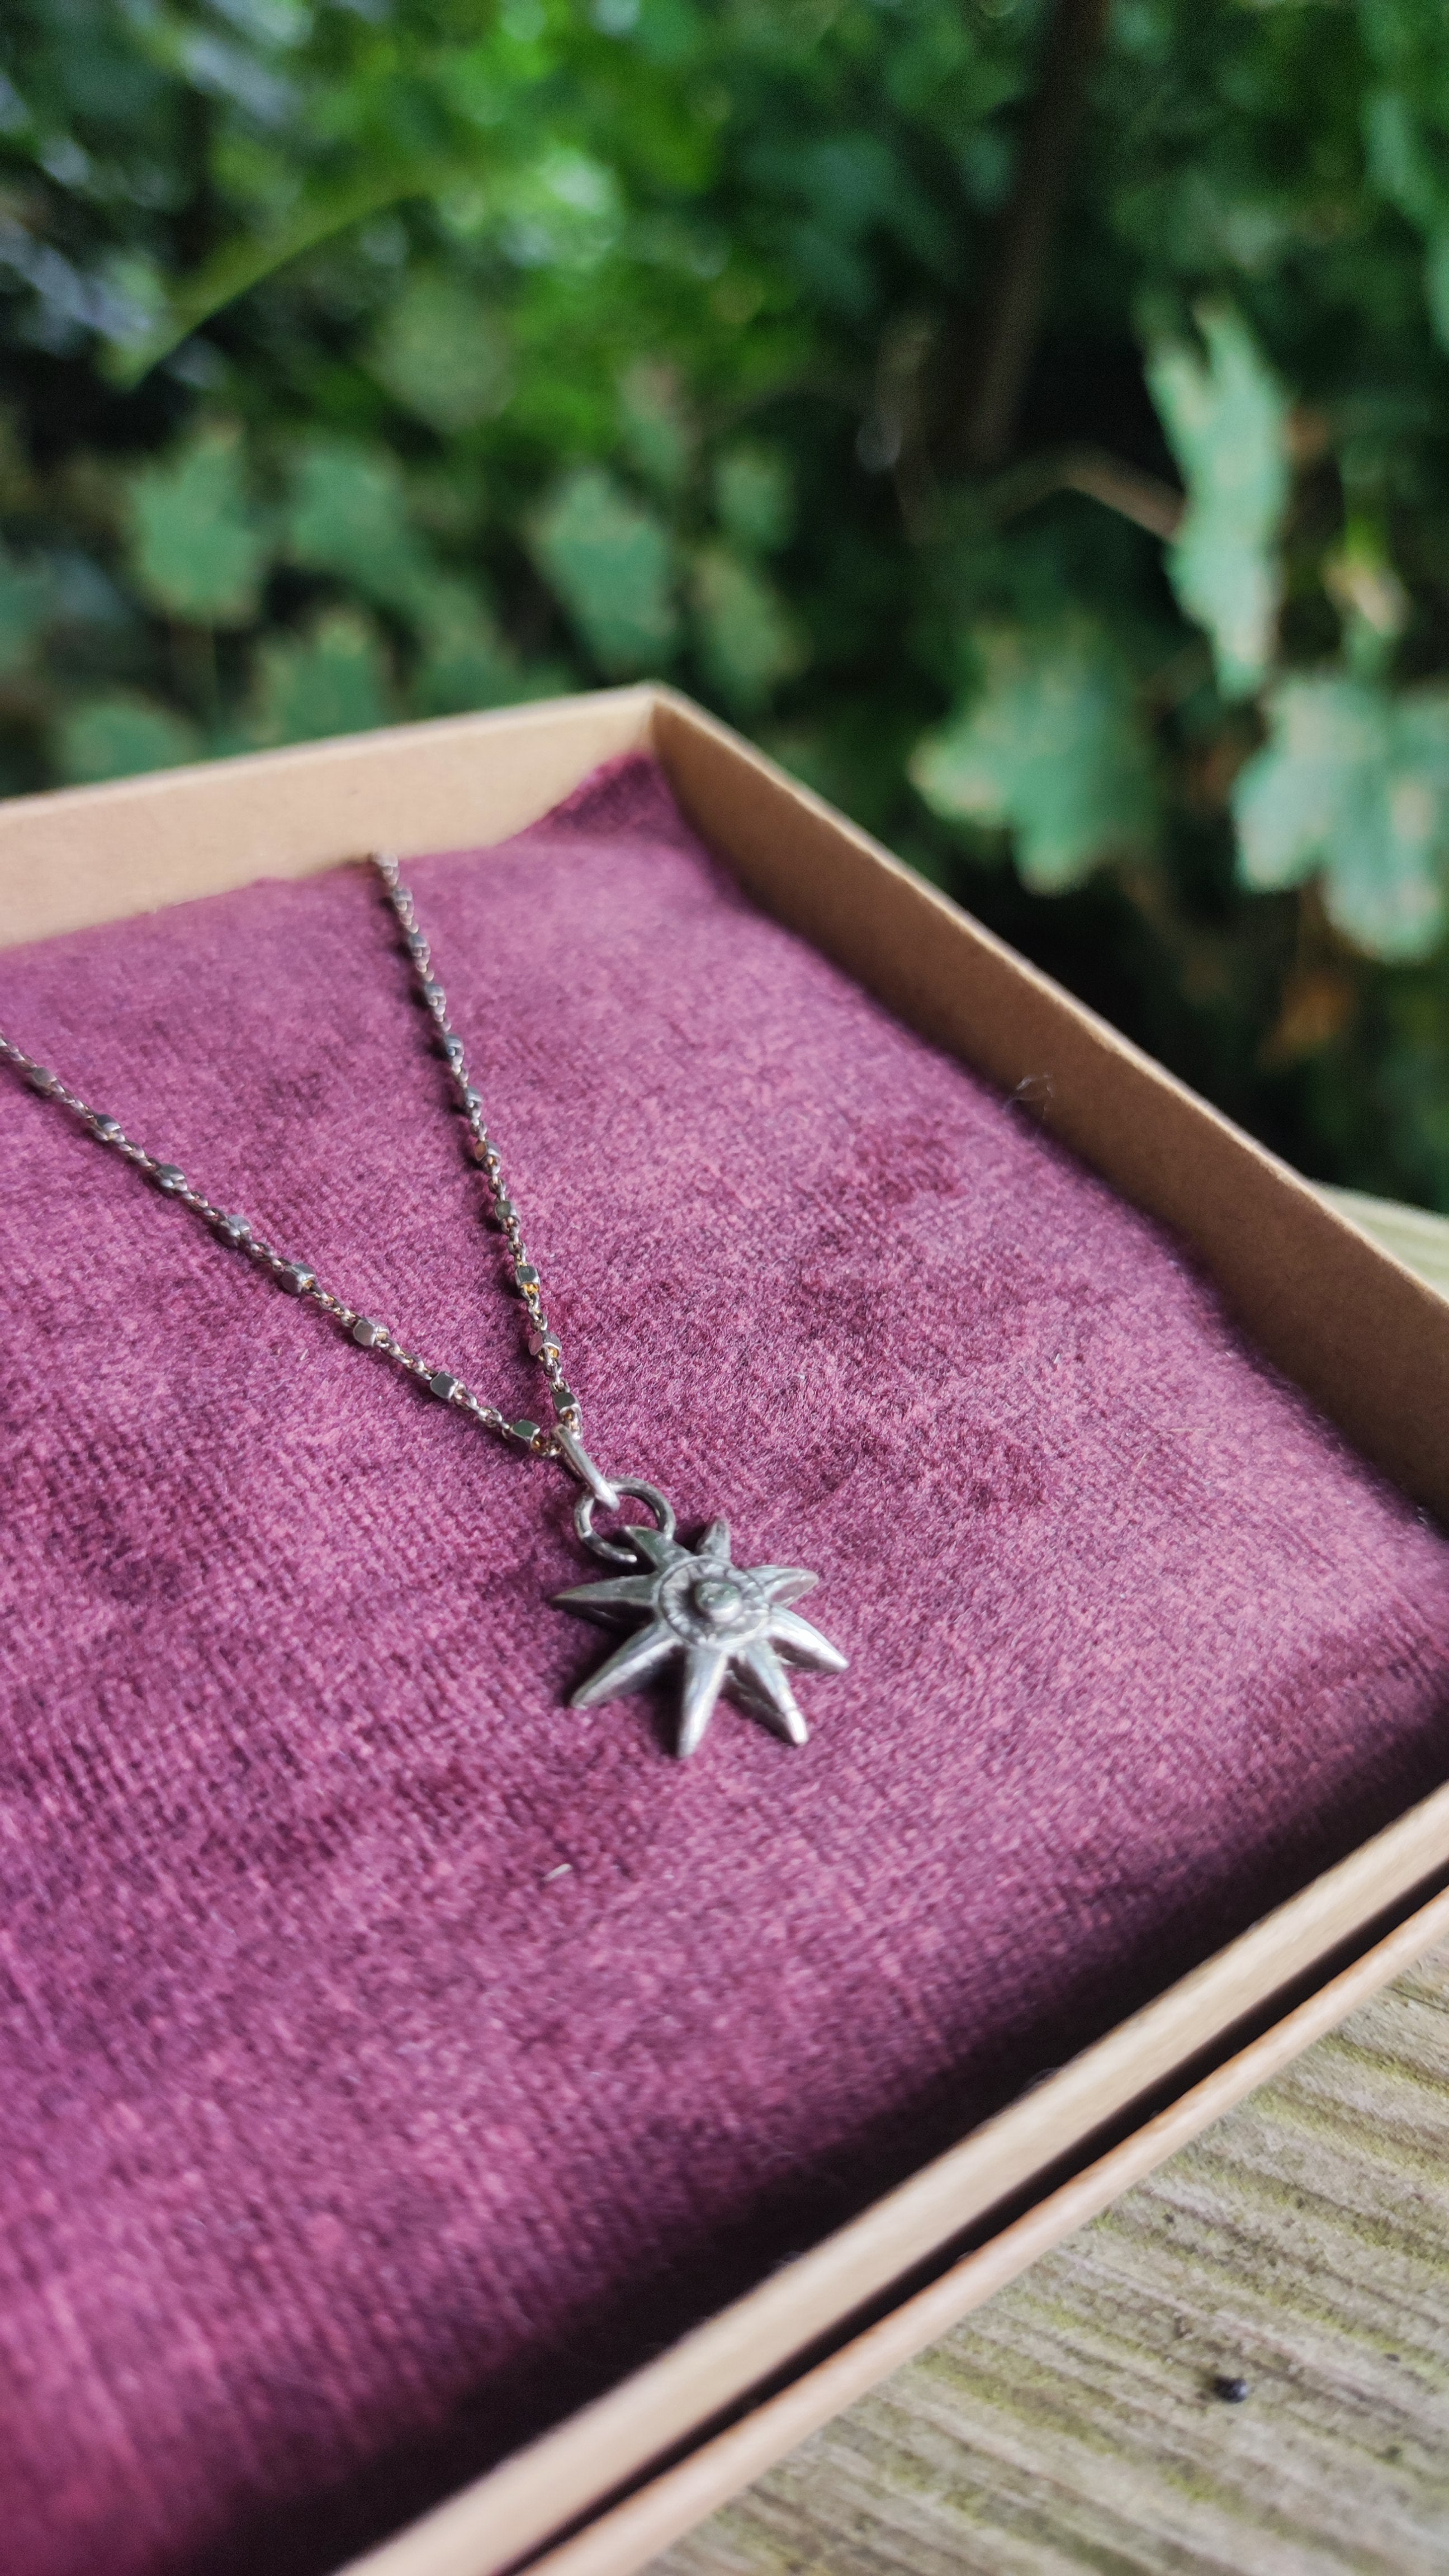 Loved the Stars - Sparkle ~ Silver pendant